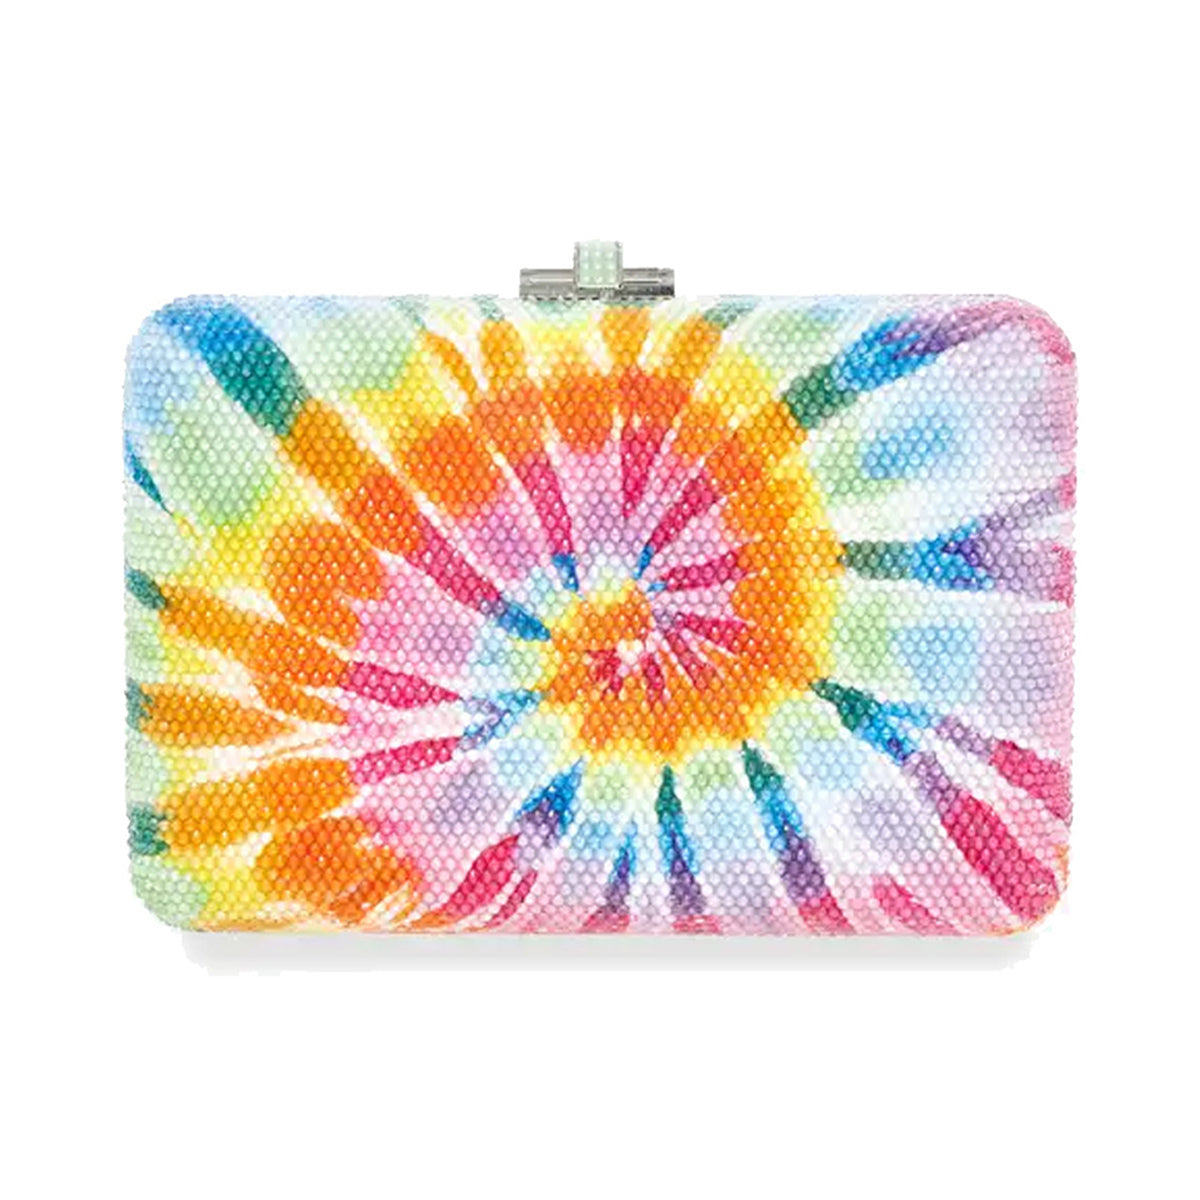 Slim Slide Clutch in Jerry Tie-Dye Crystal with Chain